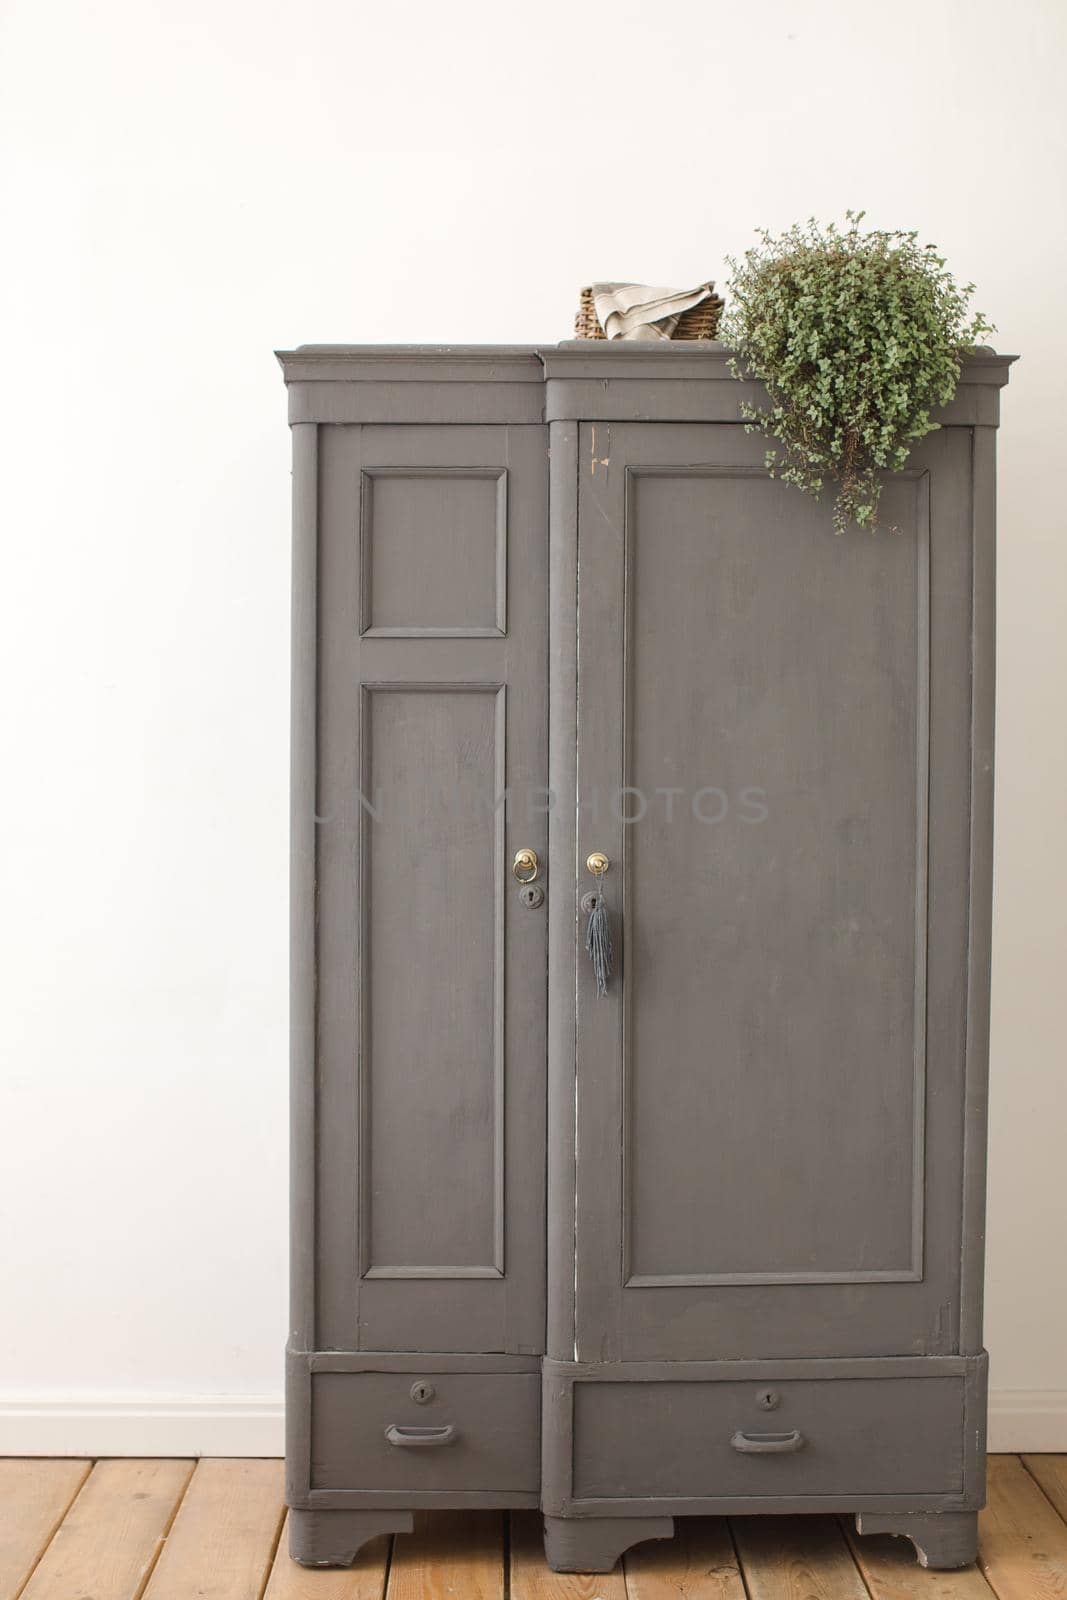 Gray old vintage cupboard in white interior by Demkat